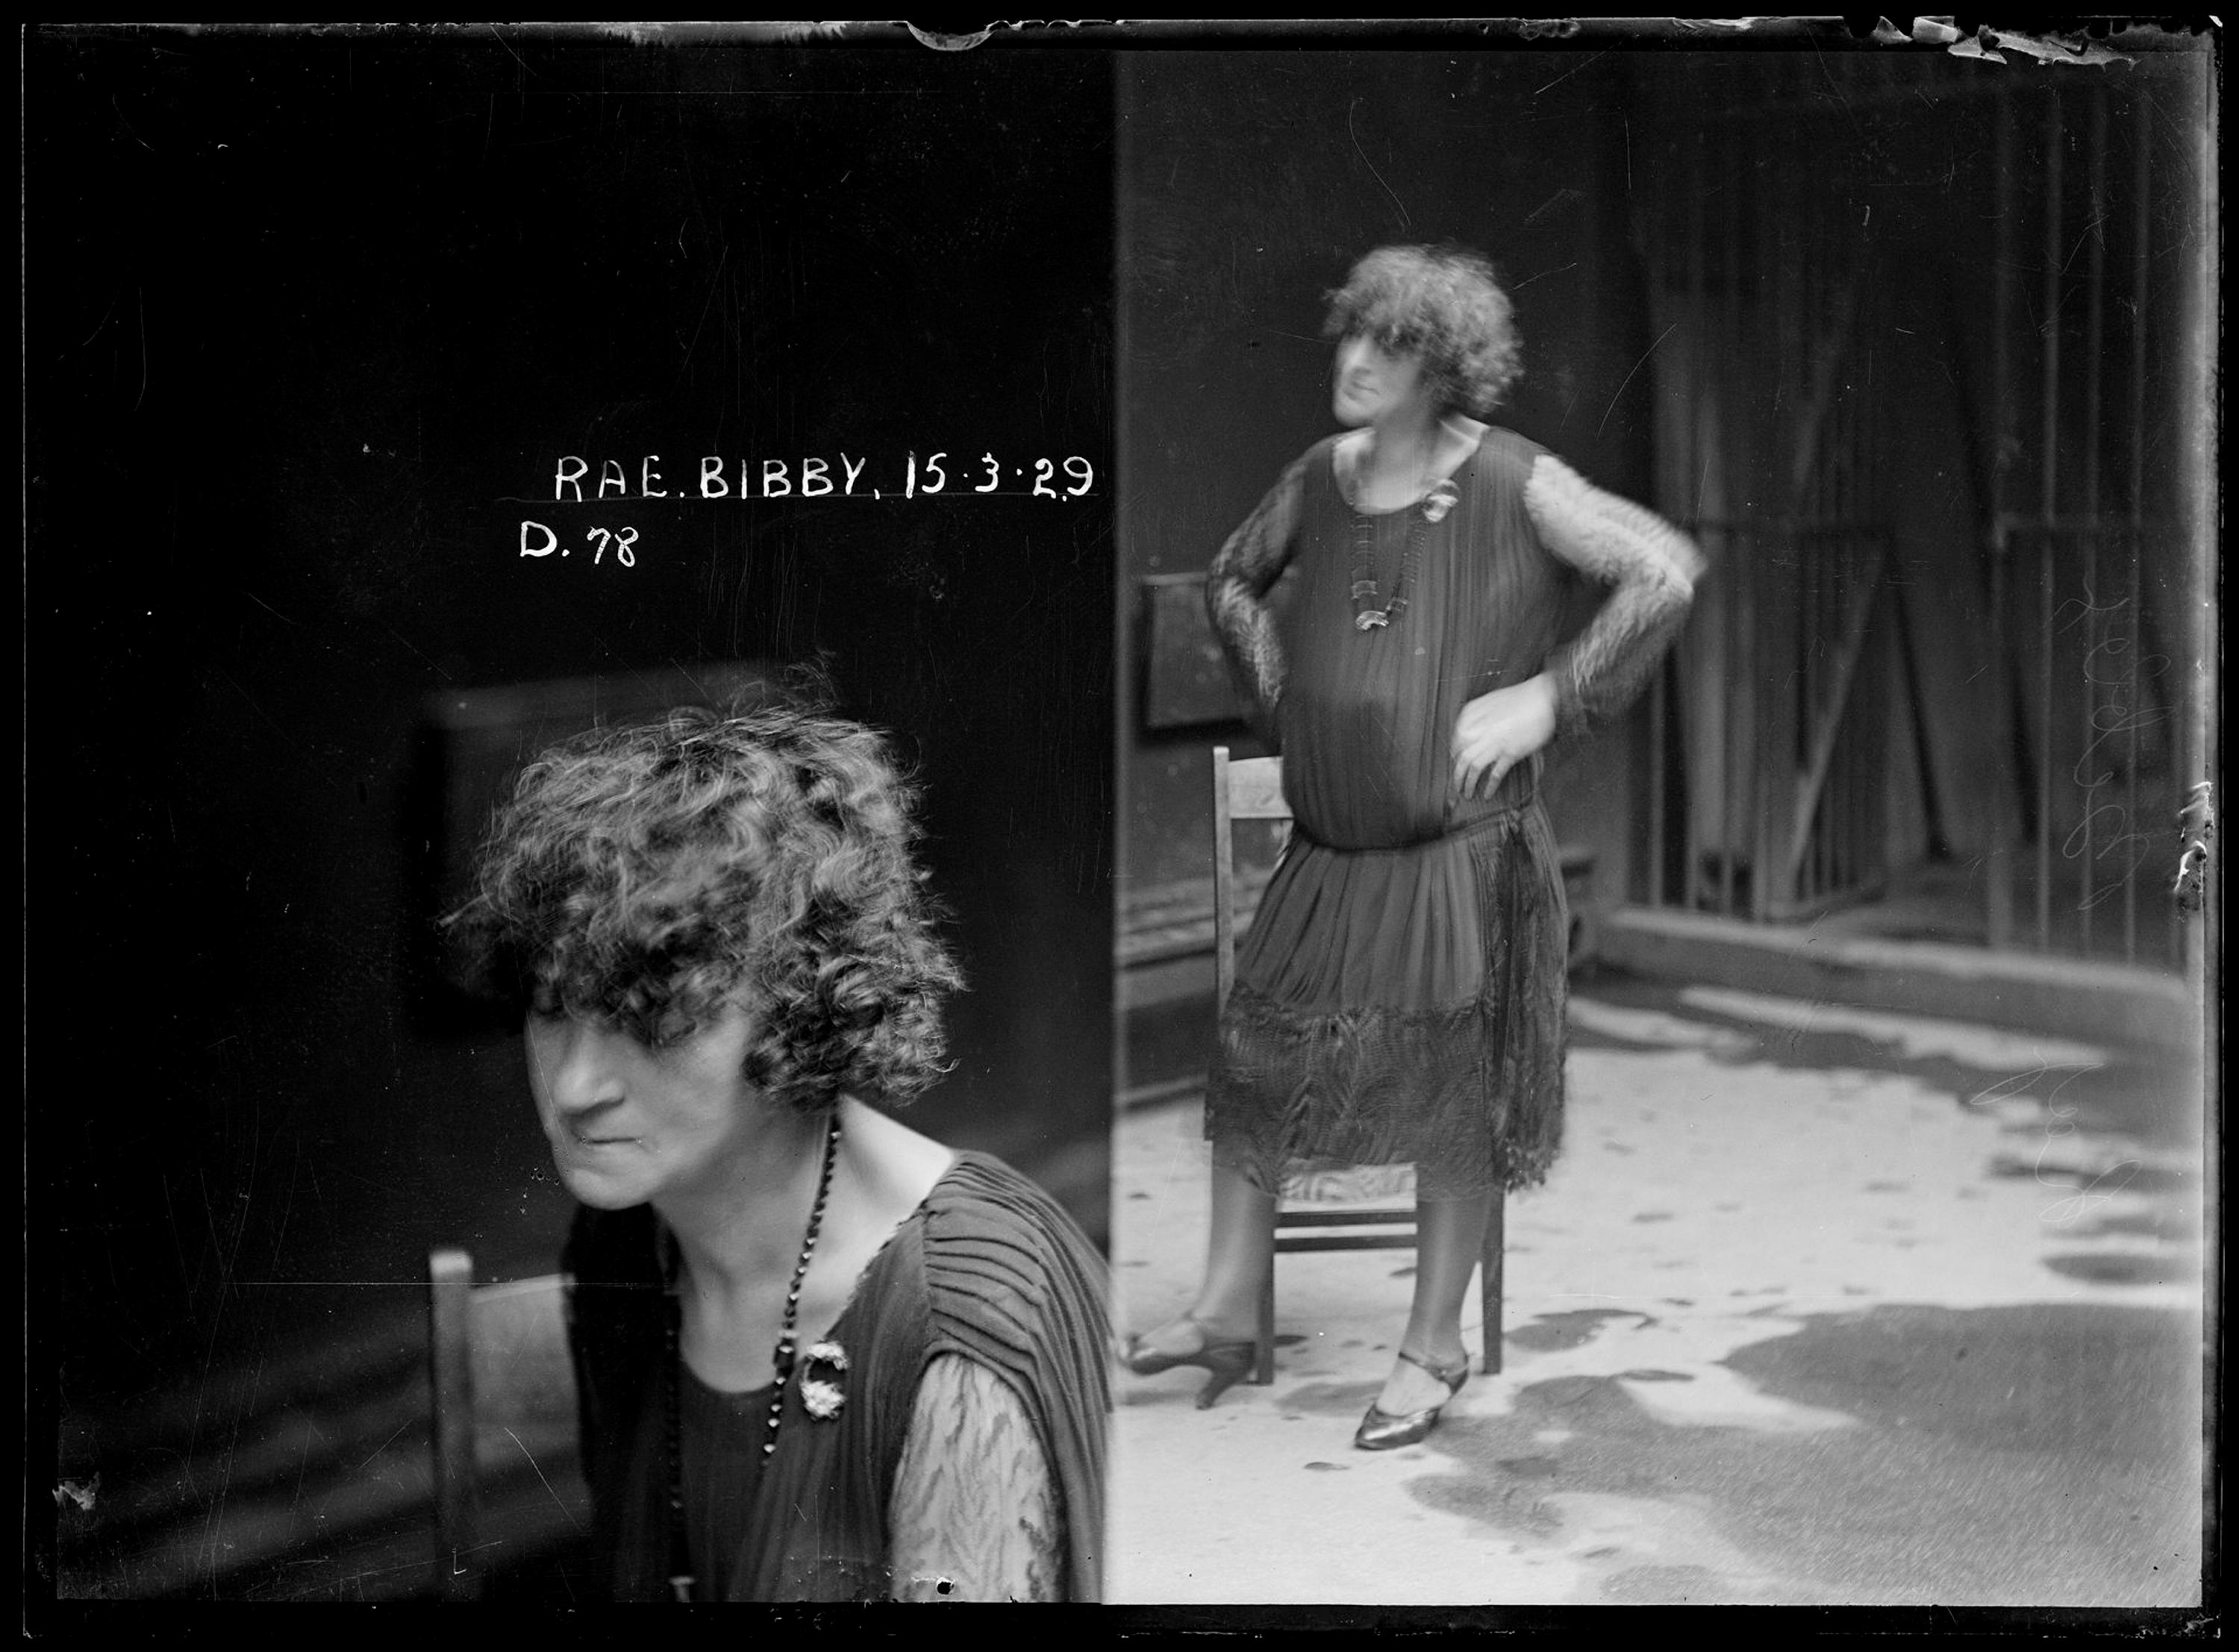 Rae Bibby, Special photograph number D78, 15 March 1929, probably Central Police Station, Sydney